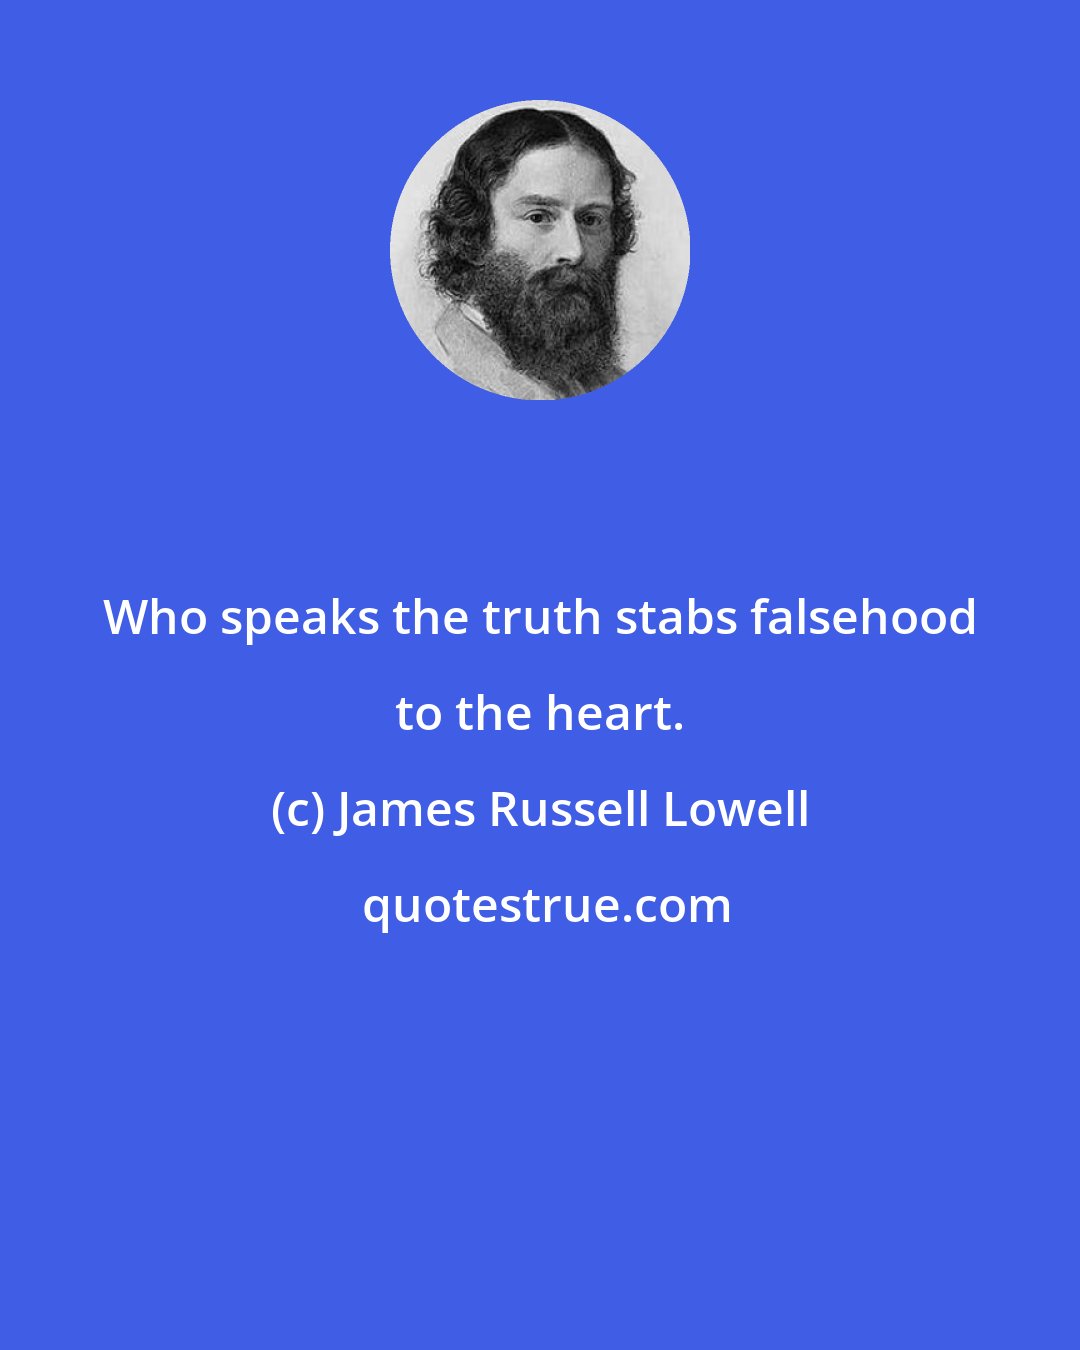 James Russell Lowell: Who speaks the truth stabs falsehood to the heart.